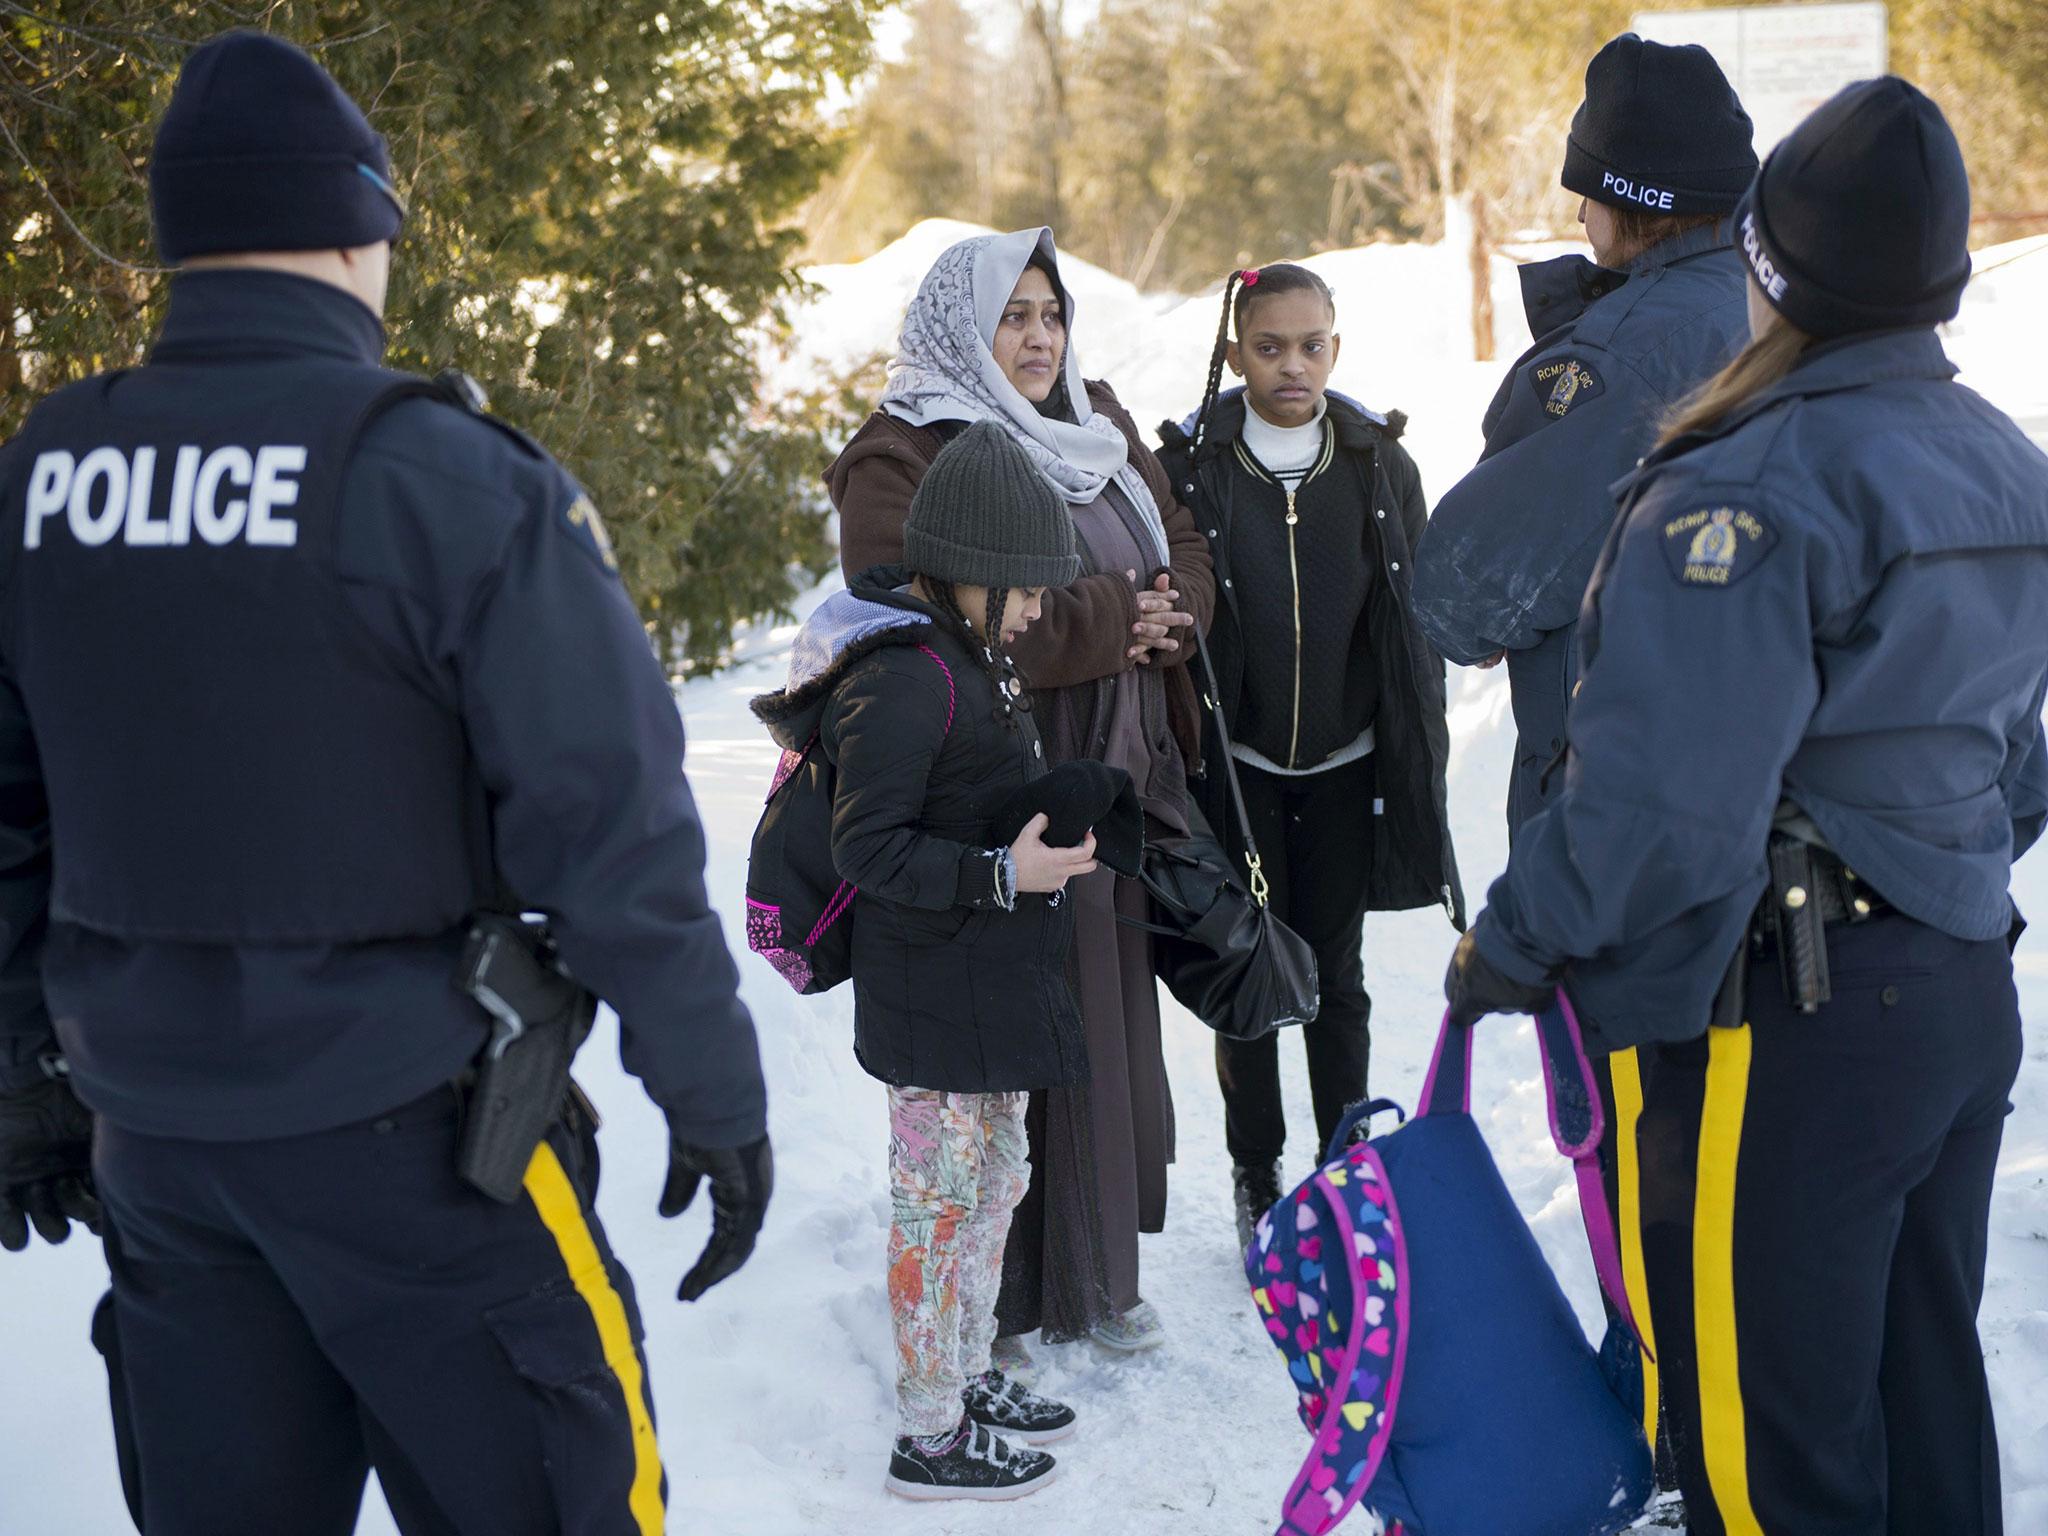 Refugees are travelling as far as Canada, risking their lives to reach safety